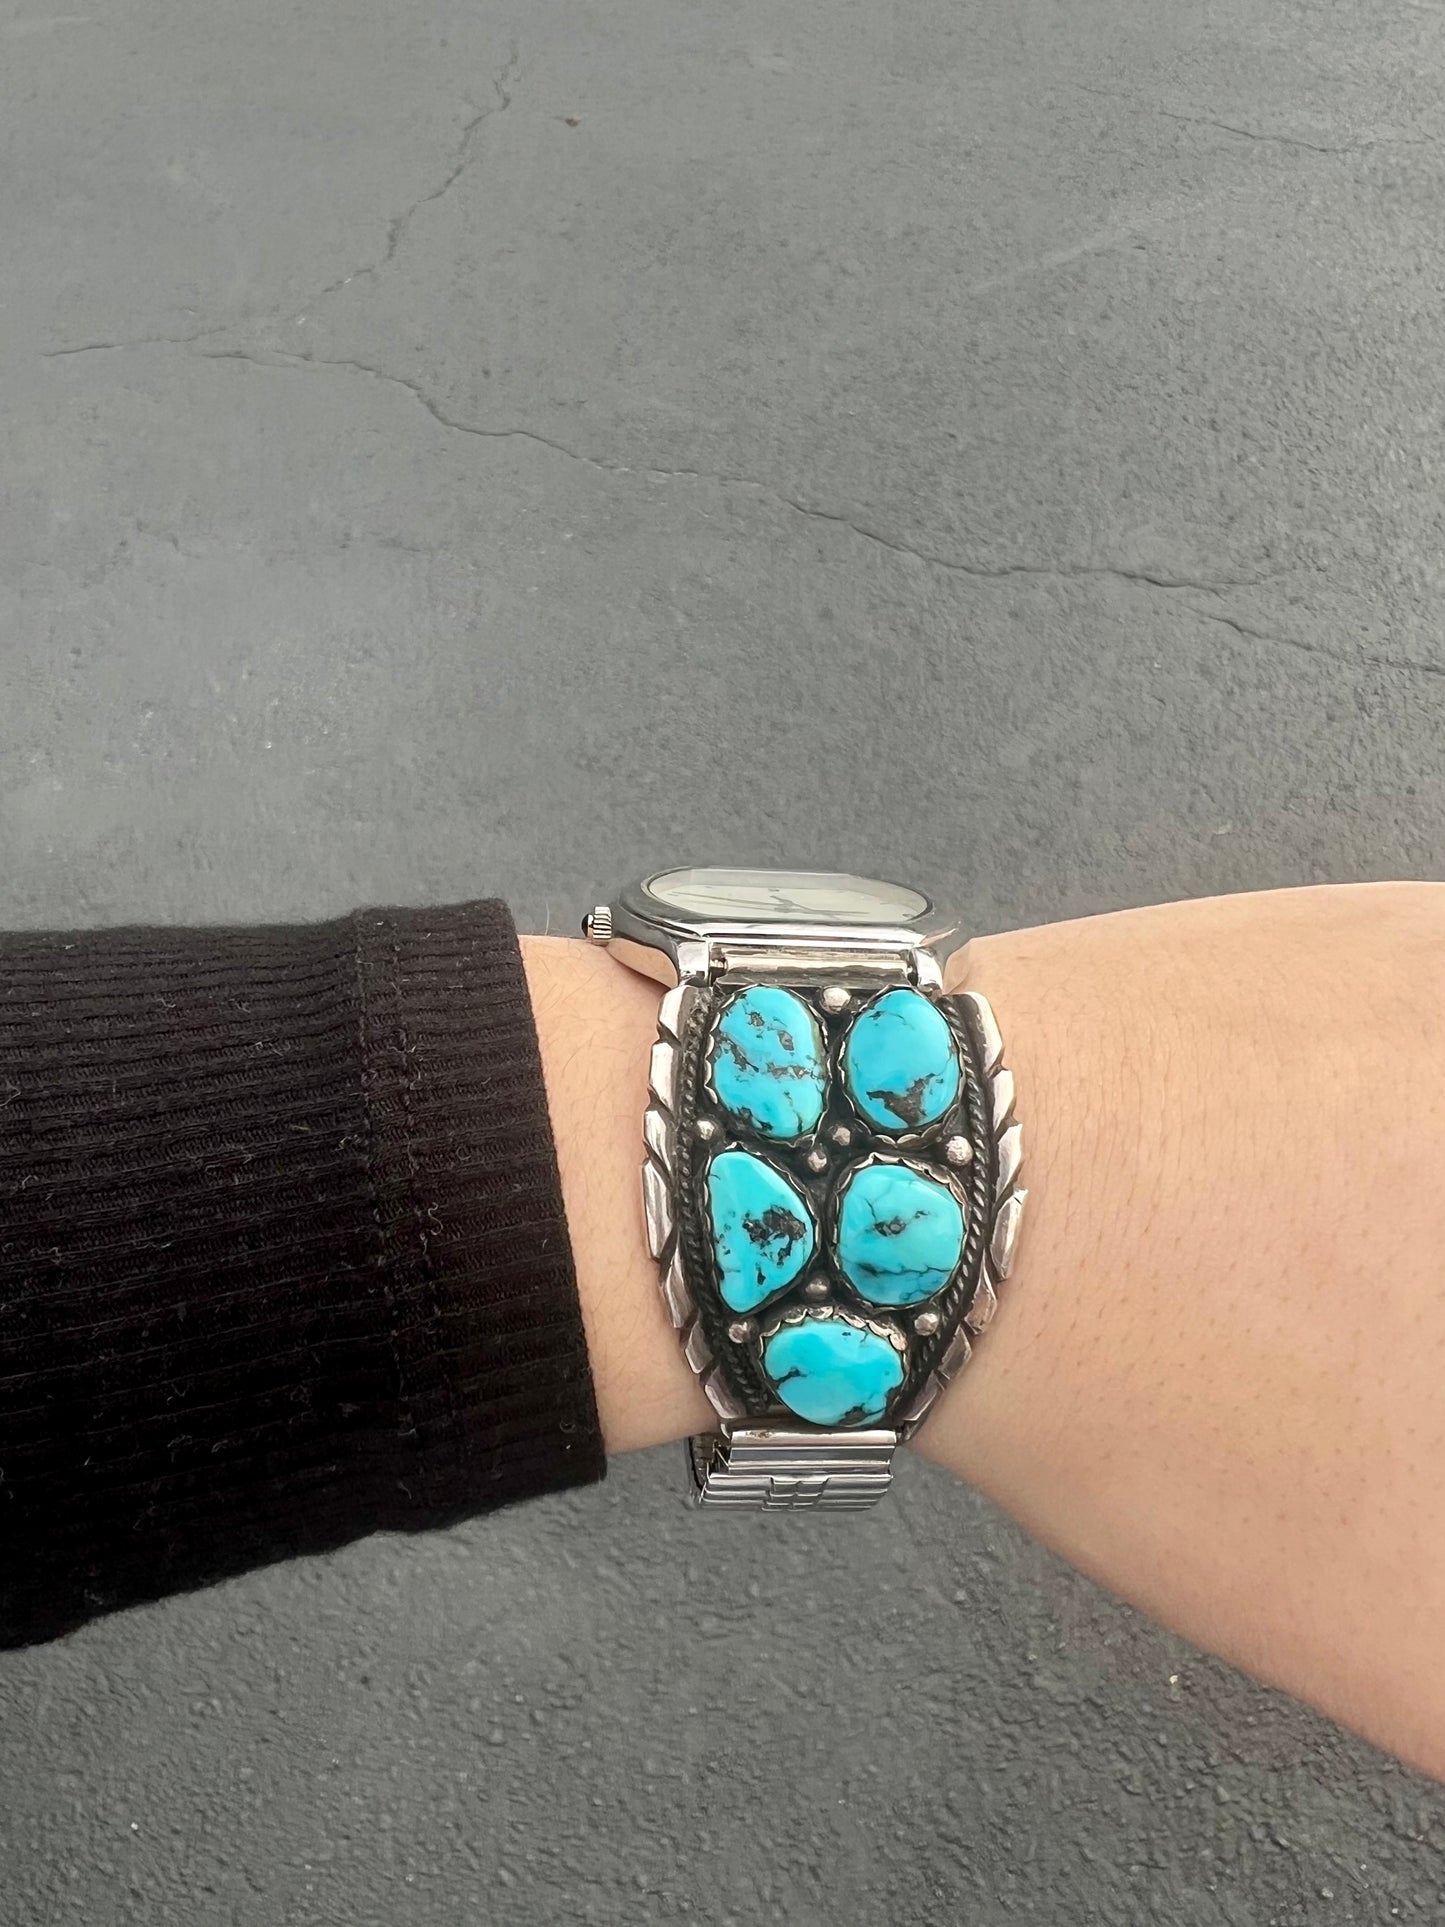 Vintage Right Time Turquoise Watch